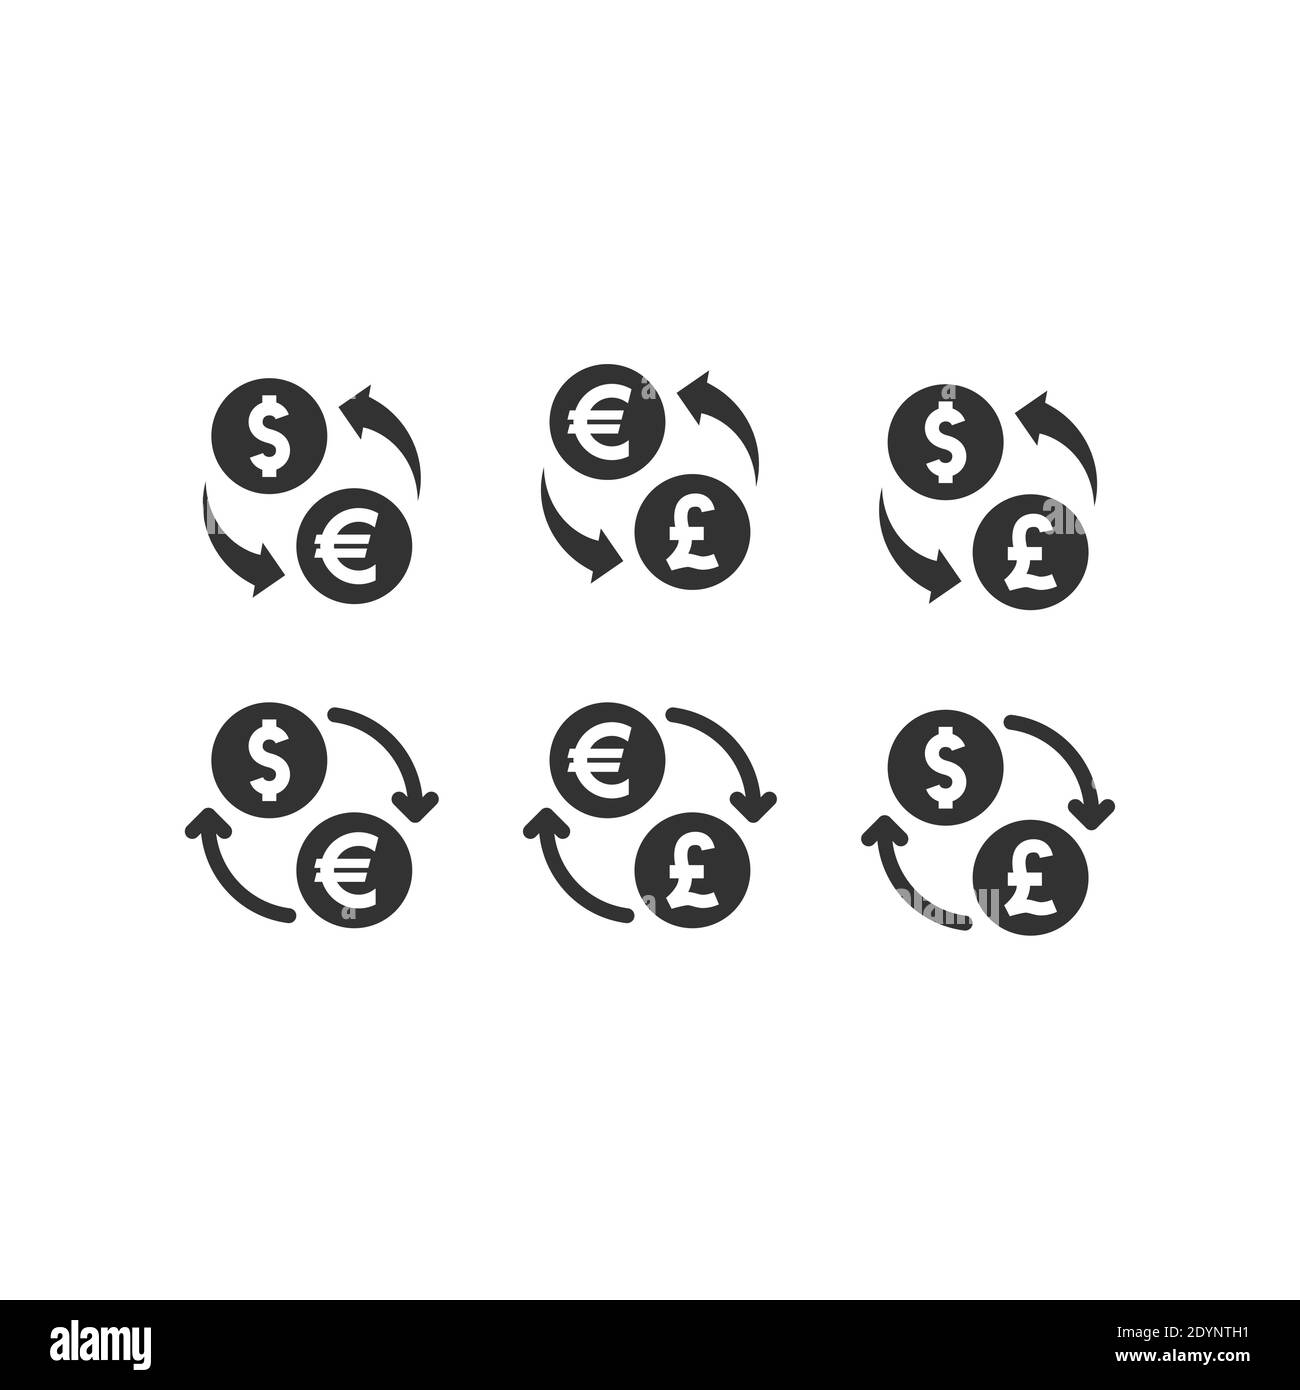 Dollar, euro and pound money exchange icons. Currencies coins with arrows black vector icon set. Stock Vector